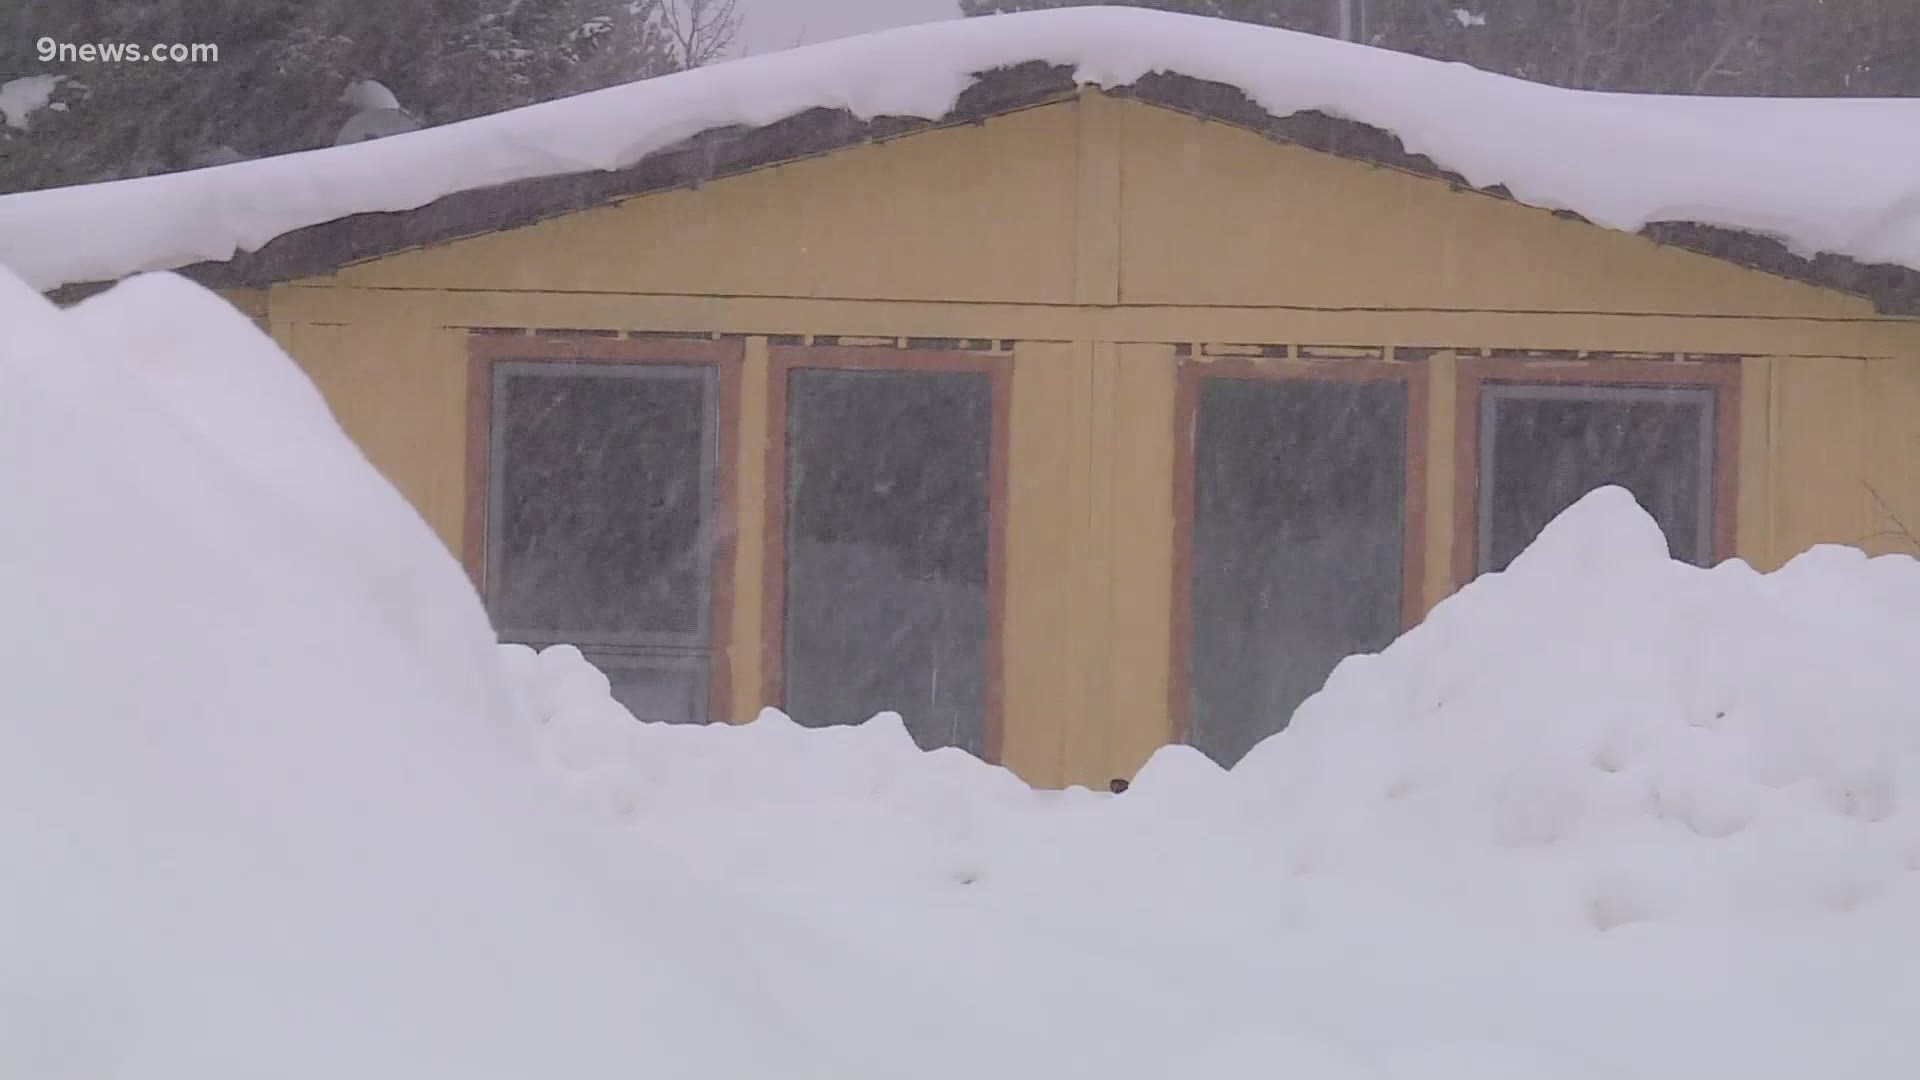 Aspen Springs is a subdivision just north of Blackhawk. They got 32.5 inches of snow with this last storm.